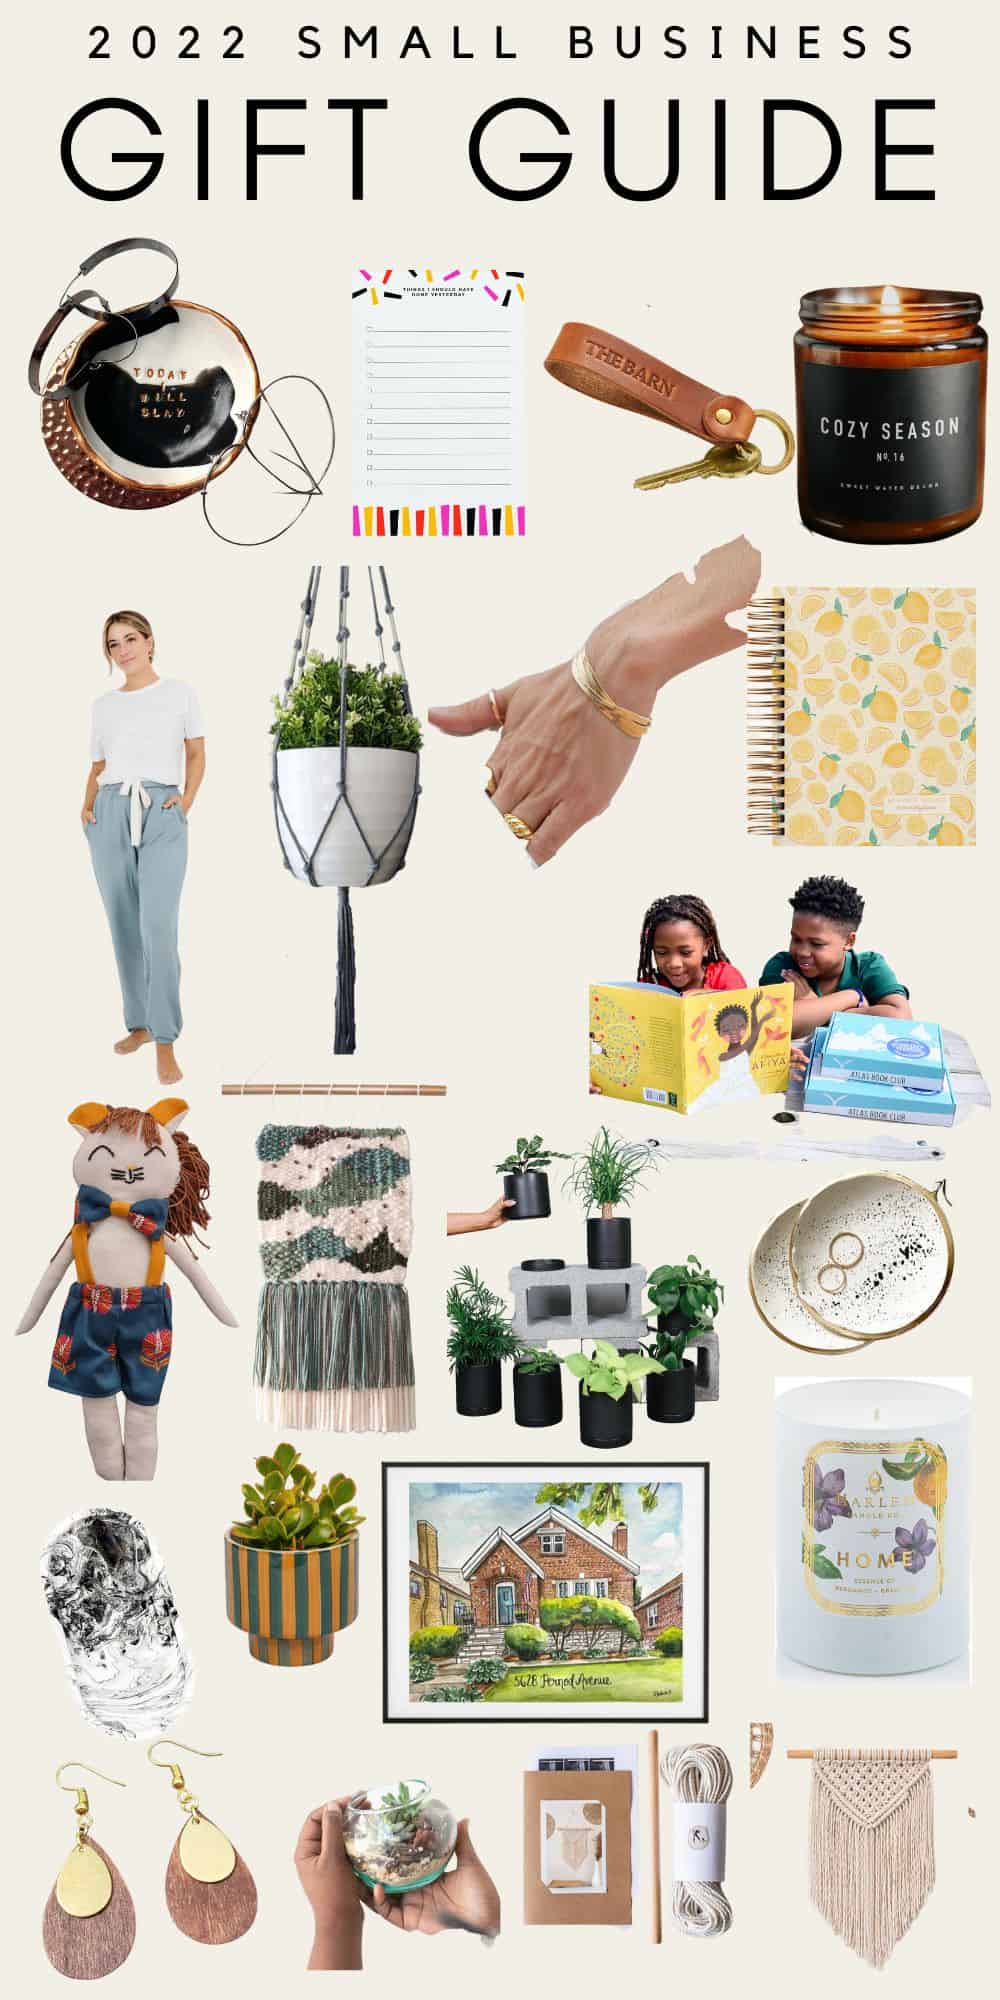 The 2022 Gift Guide: Small Business Showcase